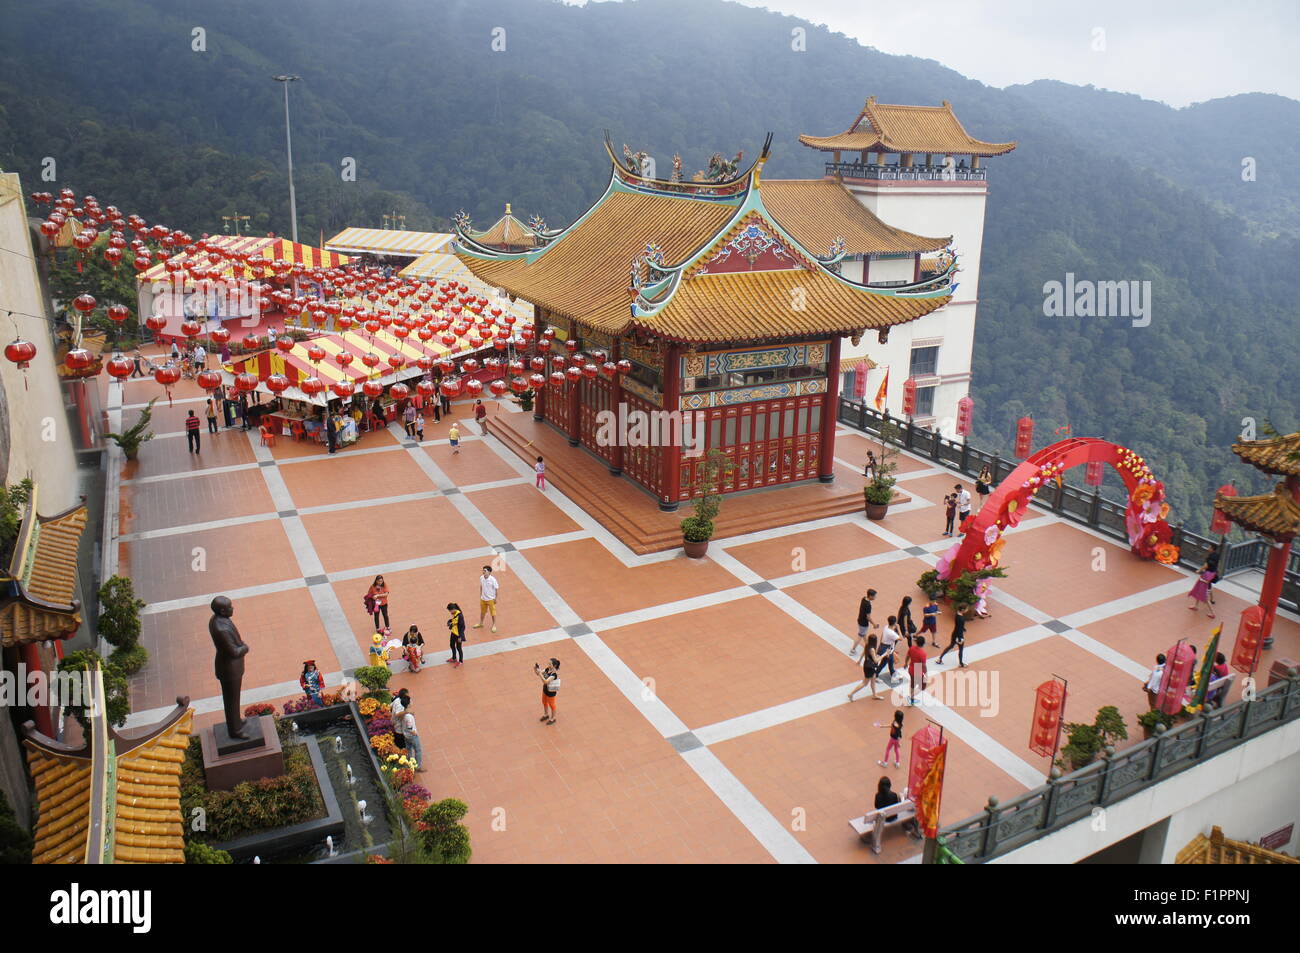 Chin Swee temple, Genting Highlands, Malaysia Stock Photo